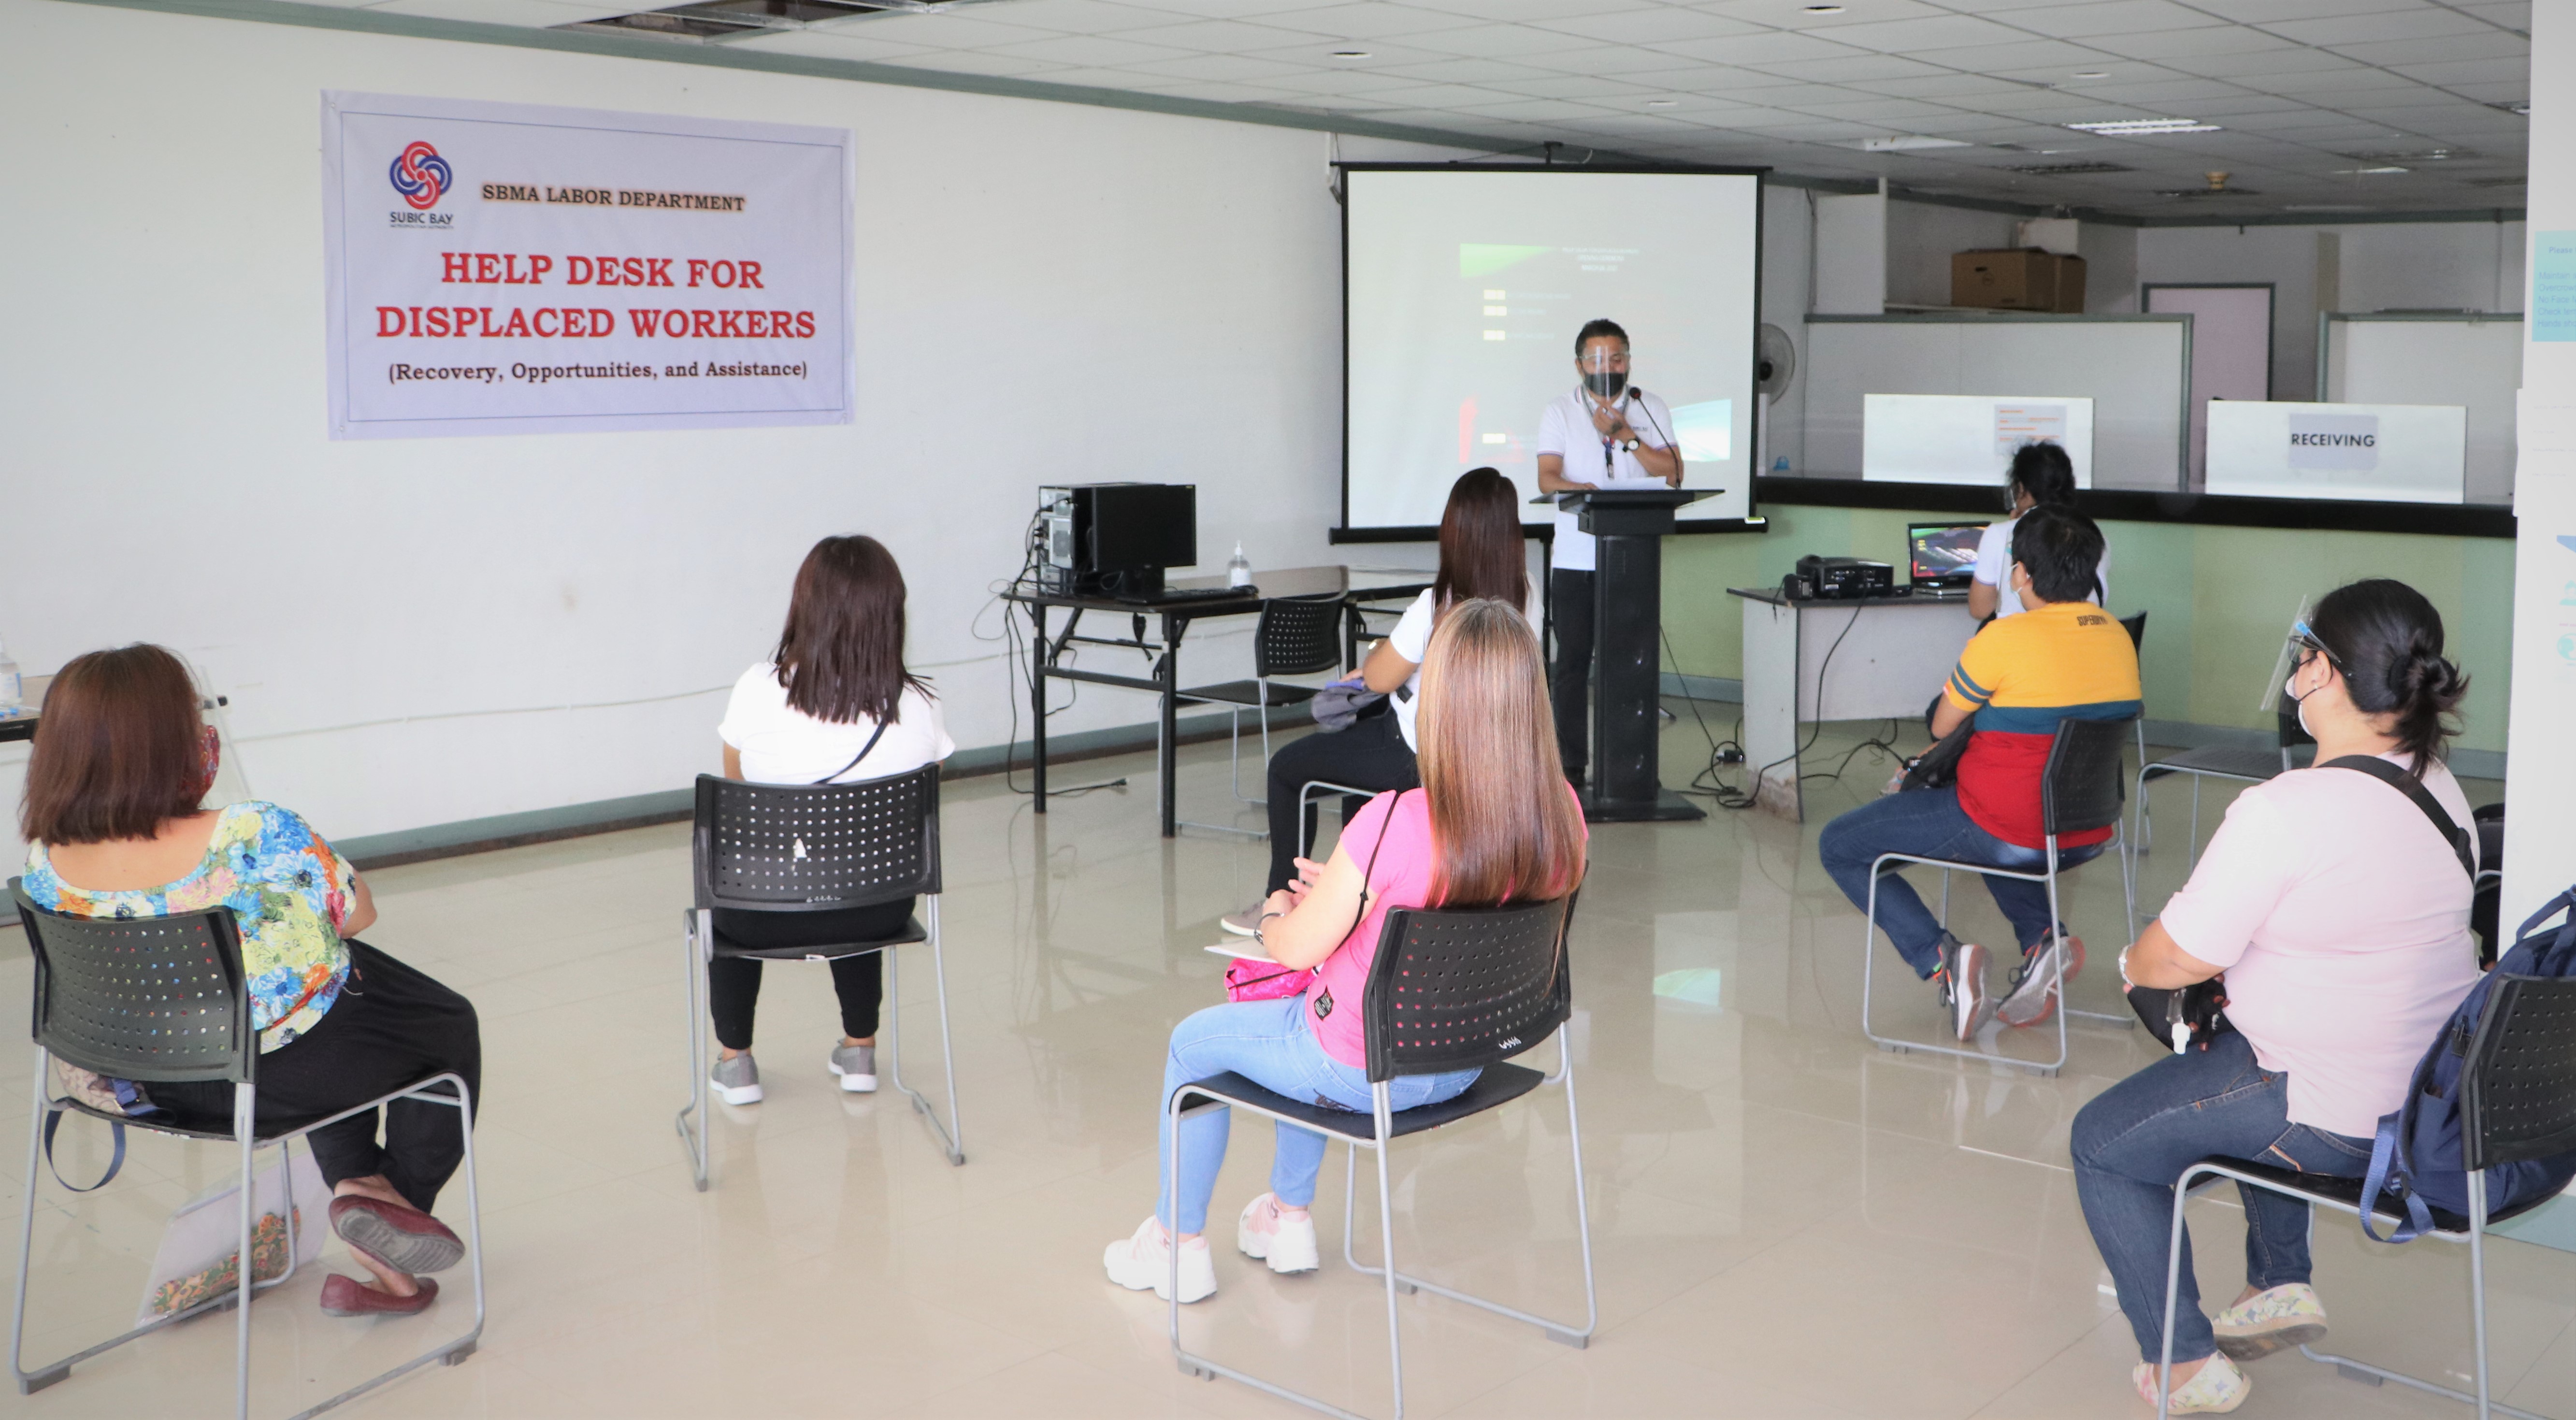 SBMA labor manager Melvin Varias explains the purpose and benefits of the SBMA Help Desk to displaced workers during the project launch on March 26